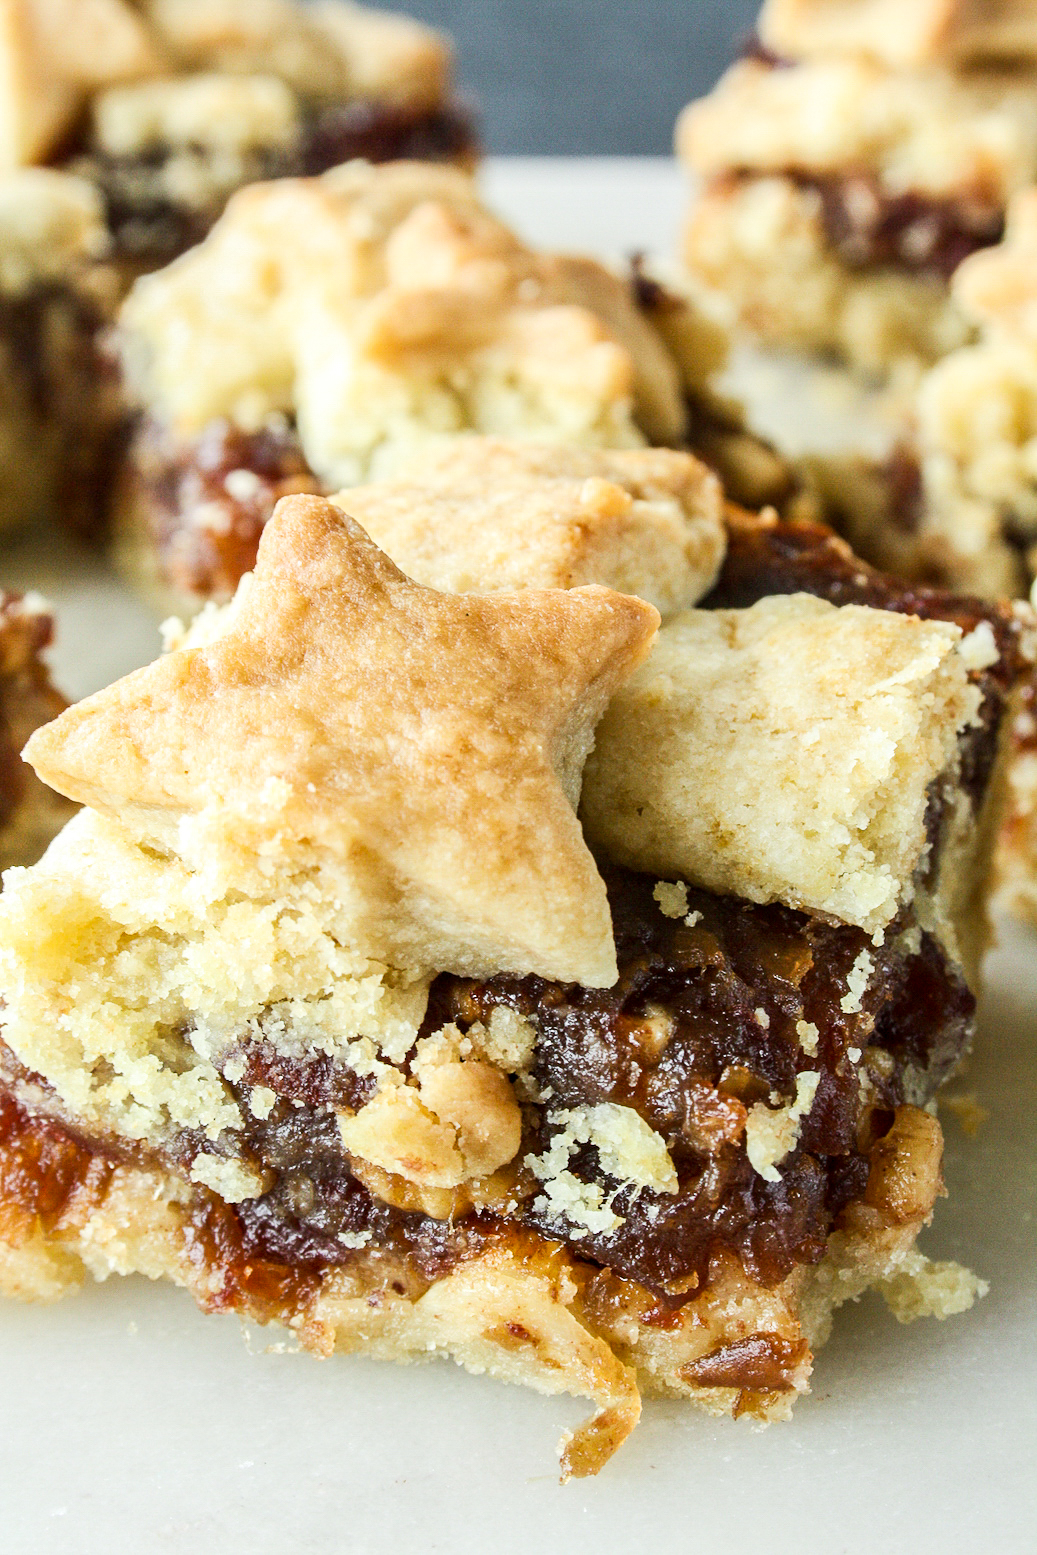 Soft buttery shortbread with a date and walnut filling